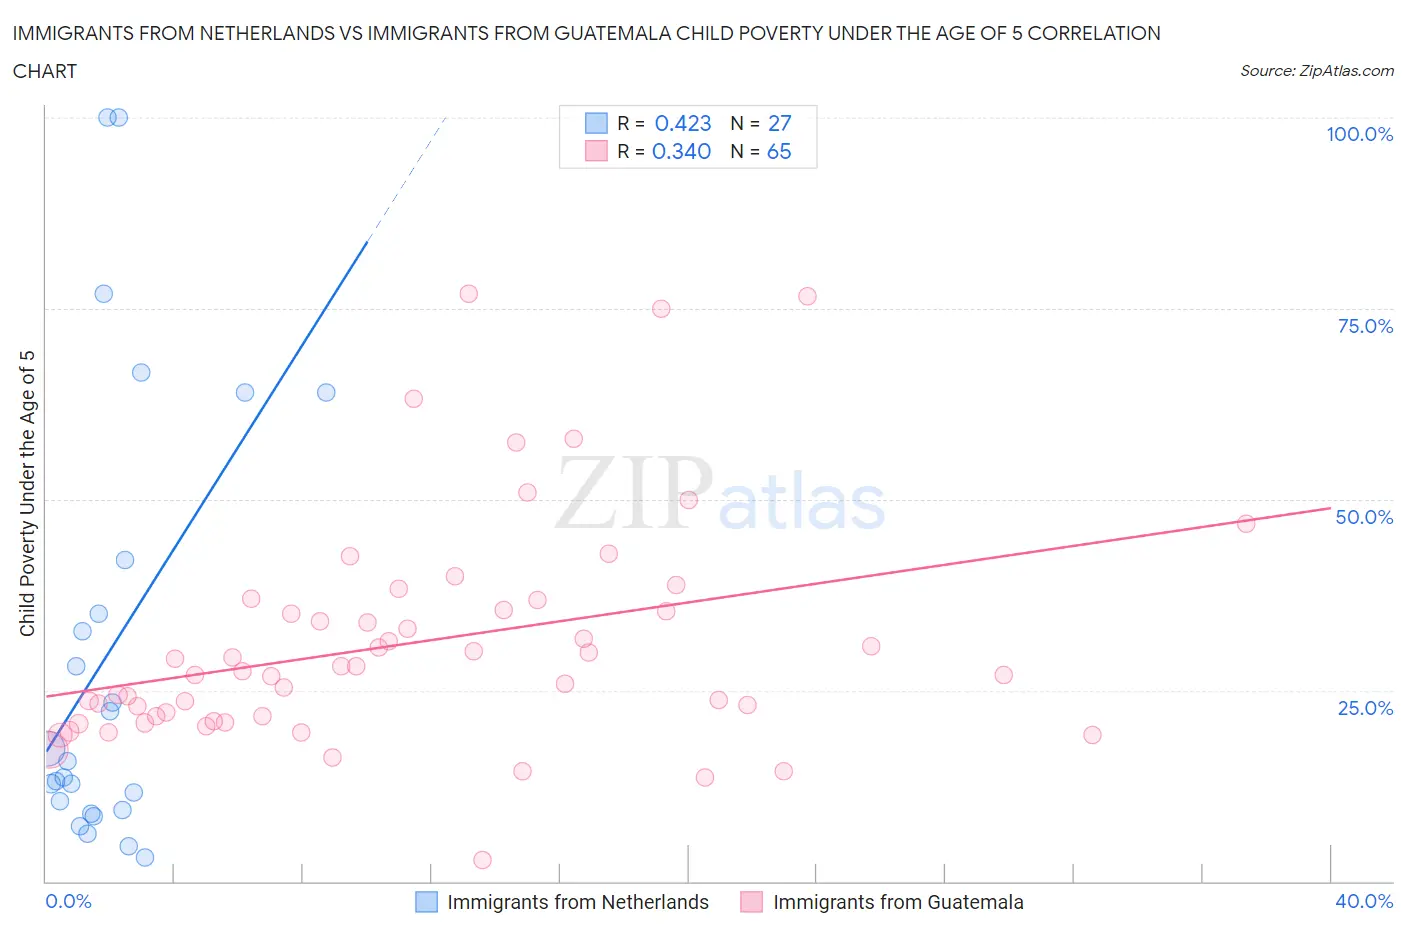 Immigrants from Netherlands vs Immigrants from Guatemala Child Poverty Under the Age of 5